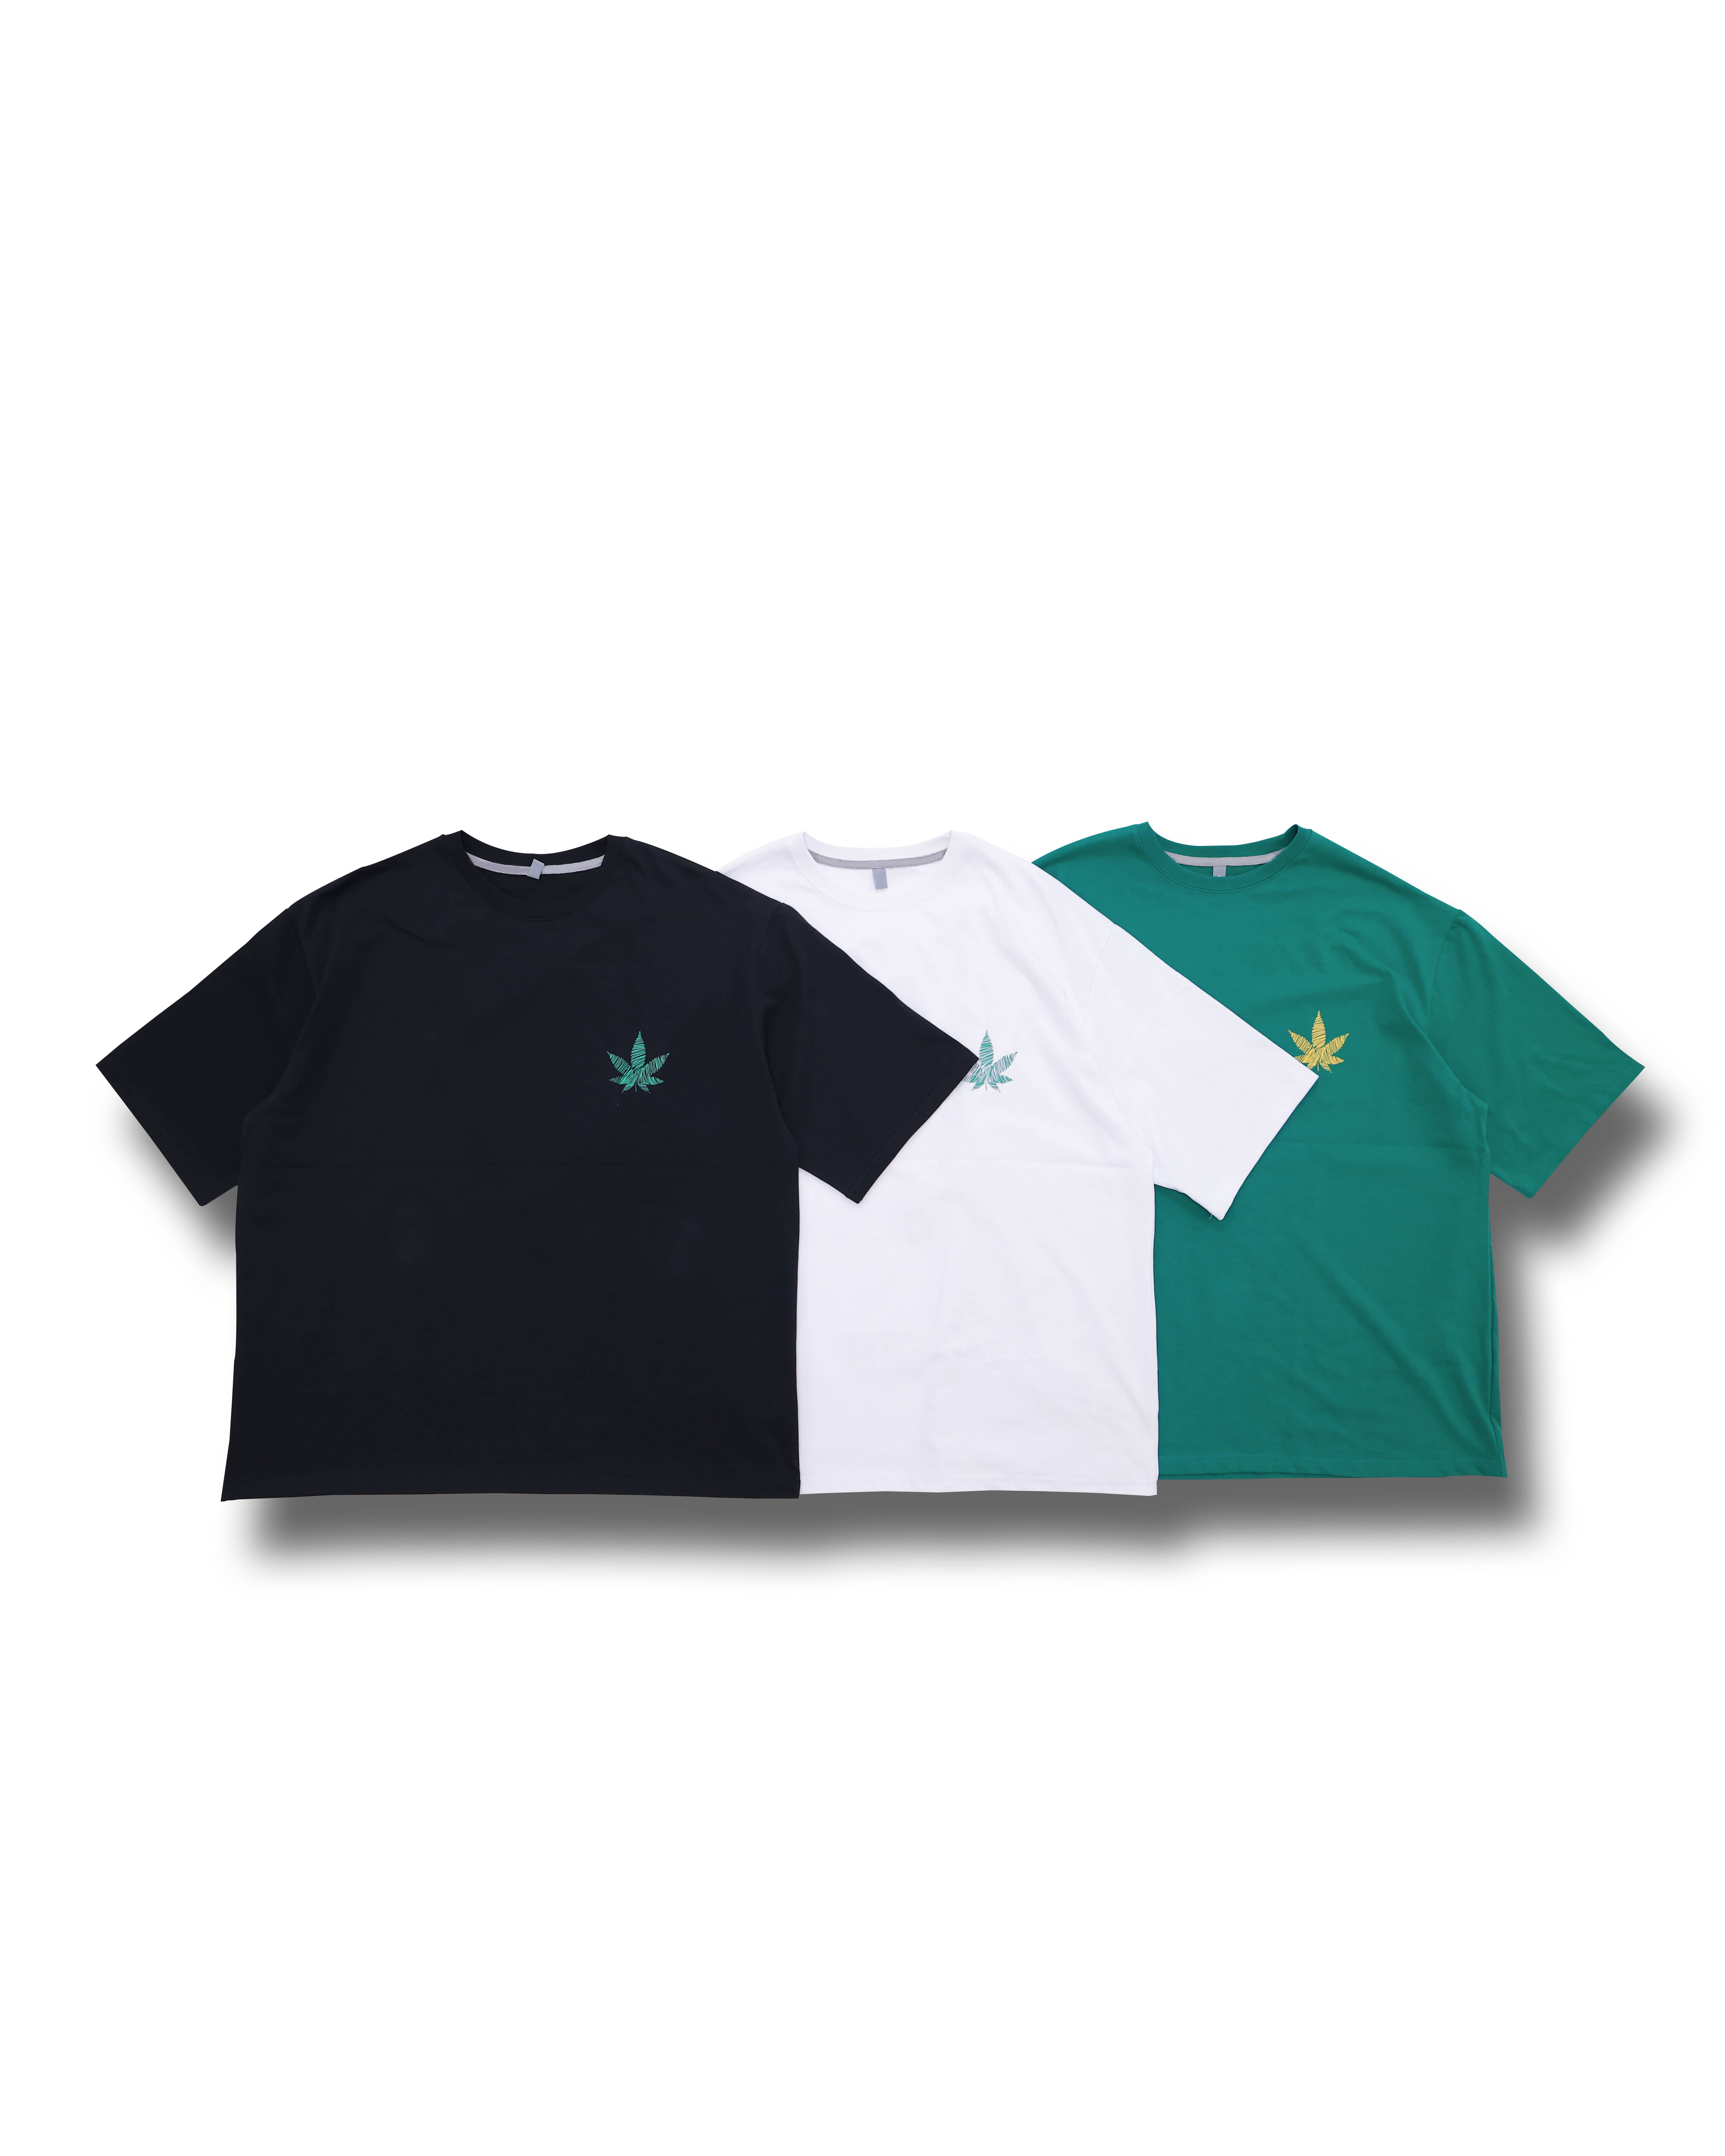 Five Leaf Printed Over T Shirts (Black/Green/White)